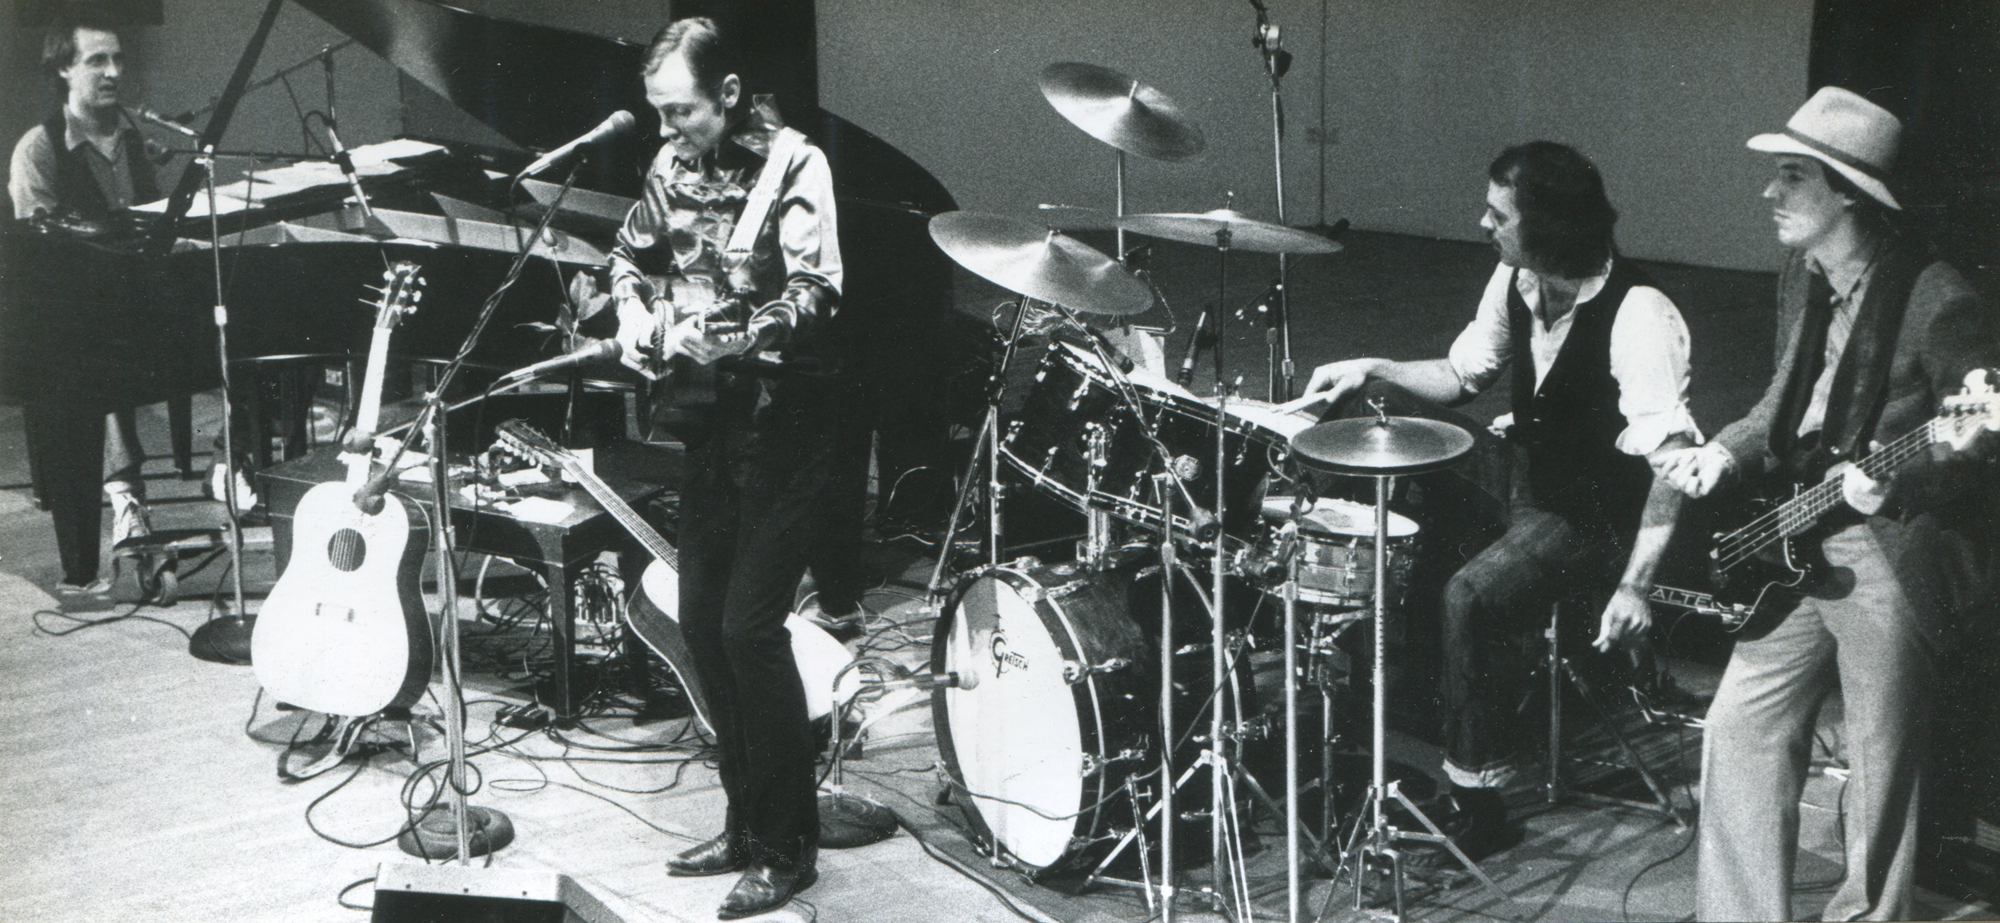 Tapert-Sparling-Band-Orchestra-Hall-1979.jpg